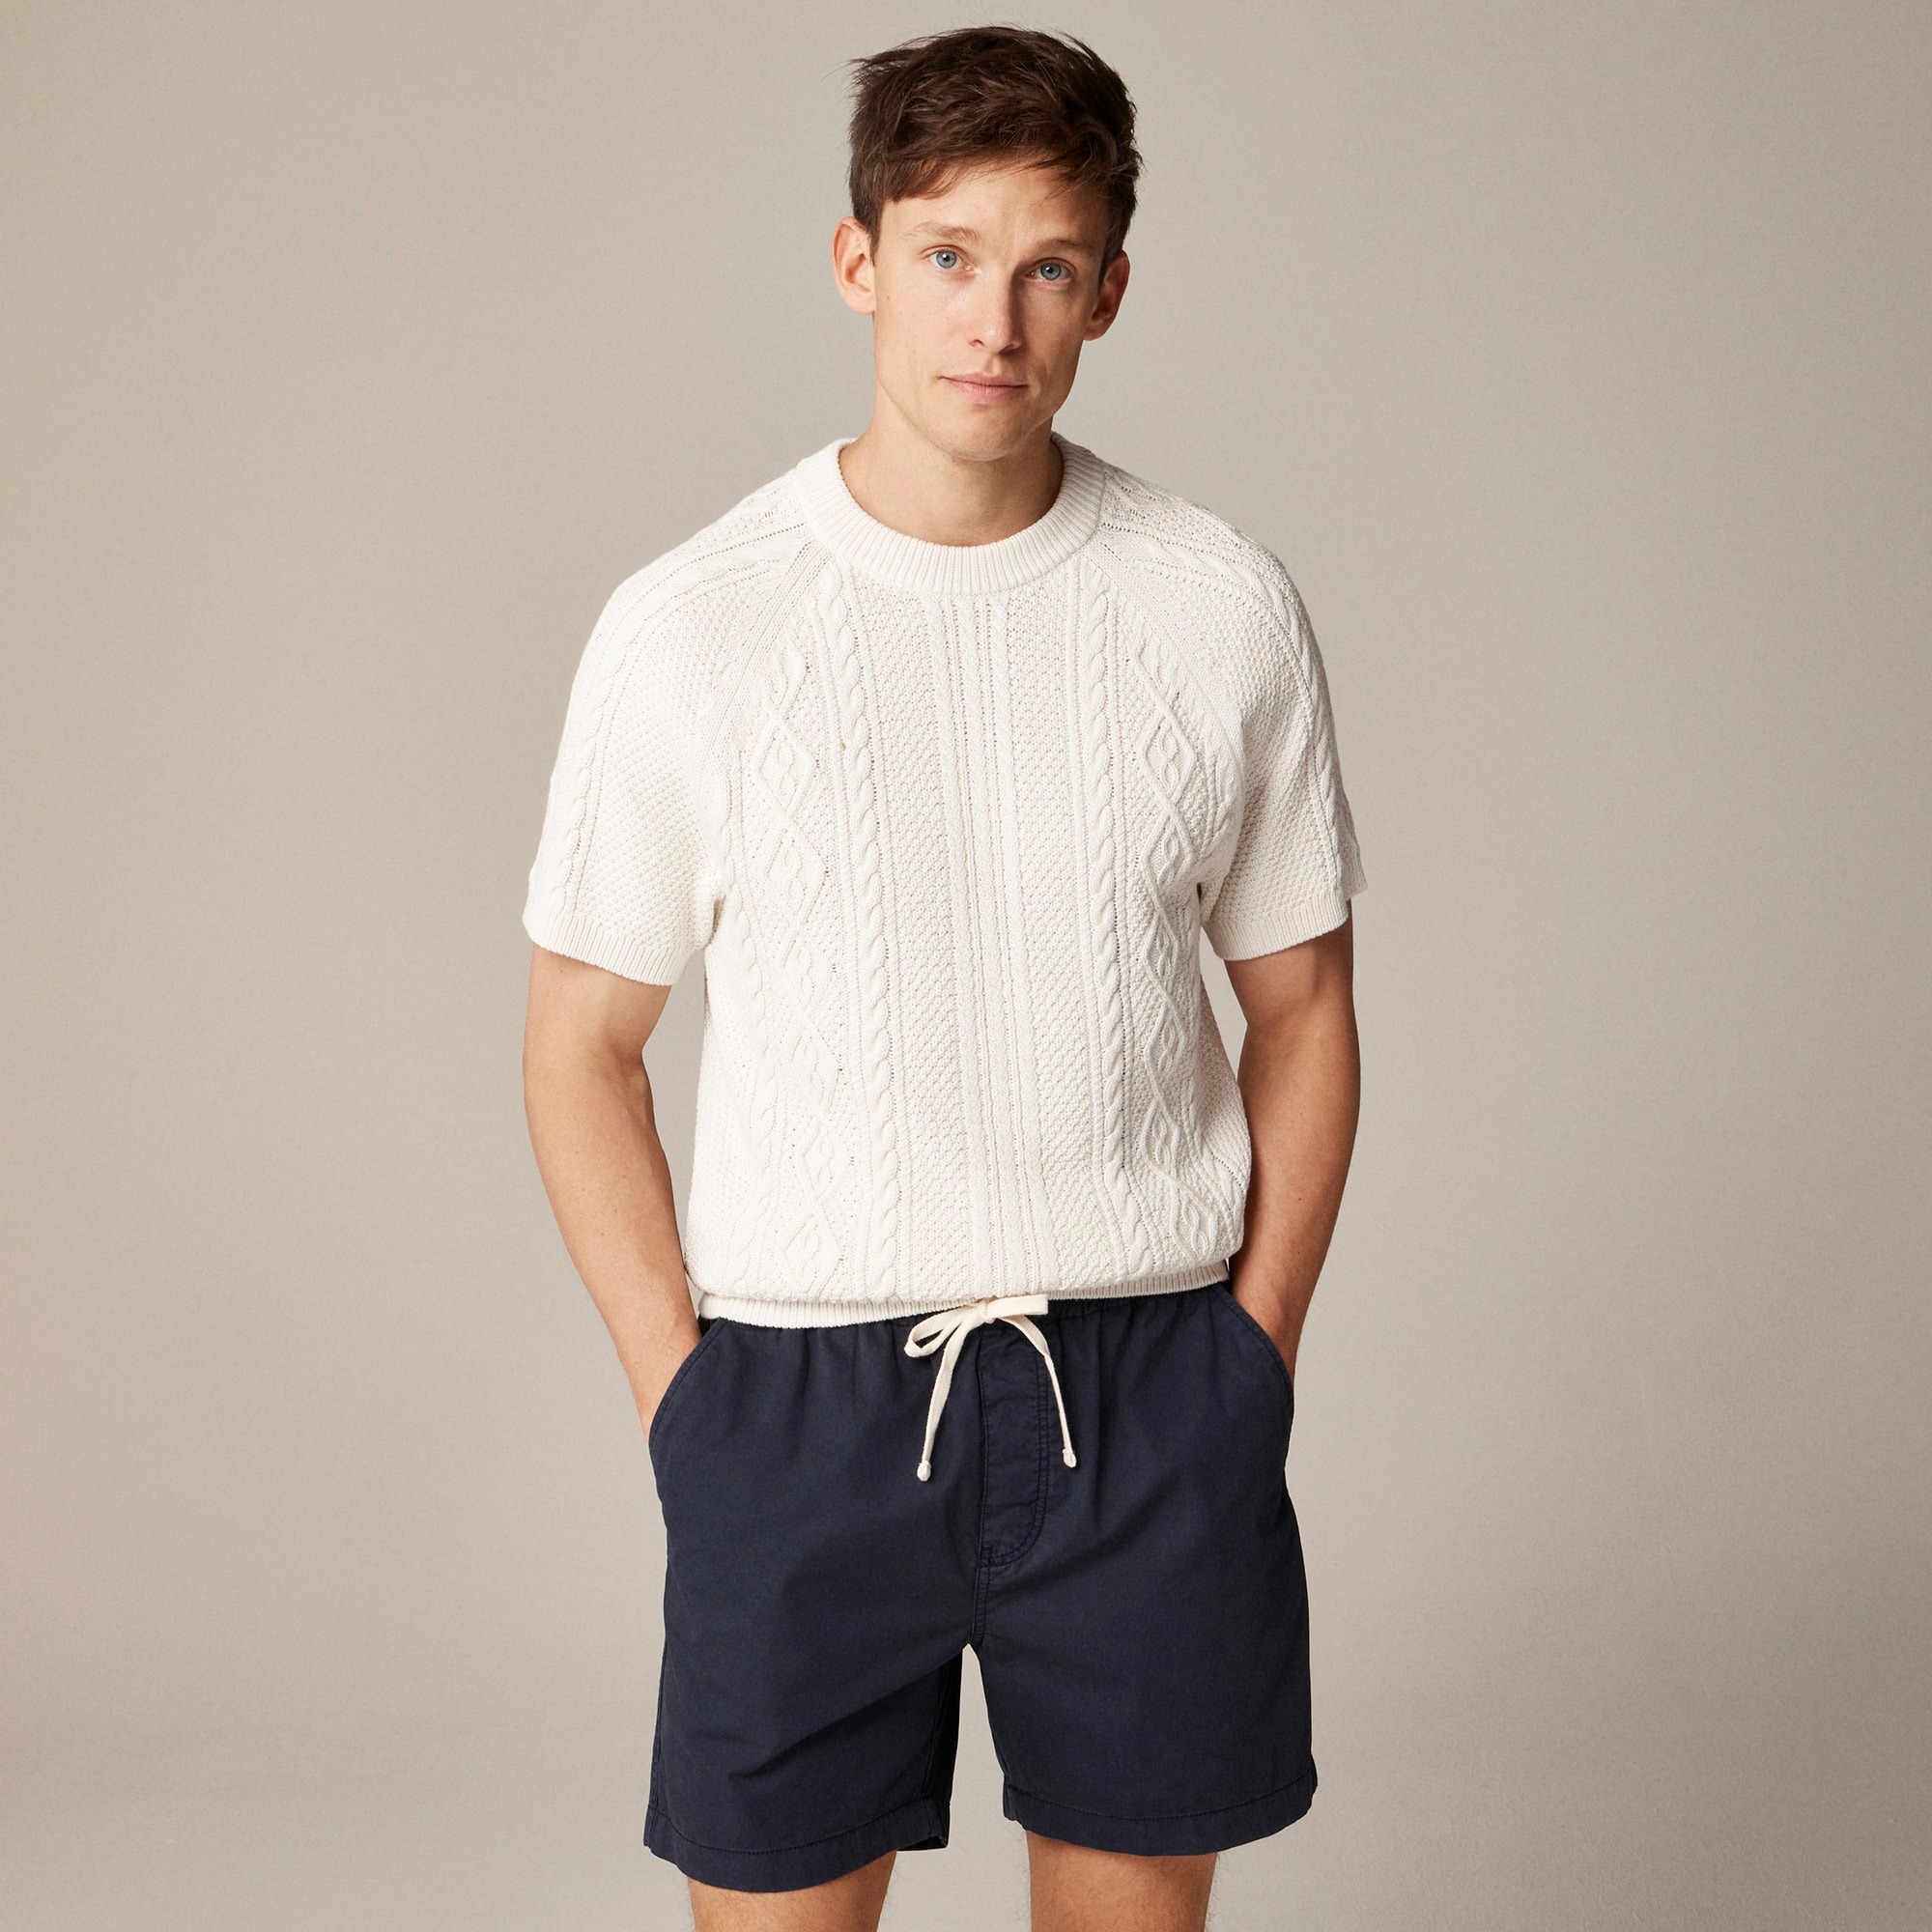 Jcrew Short-sleeve cotton cable-knit sweater